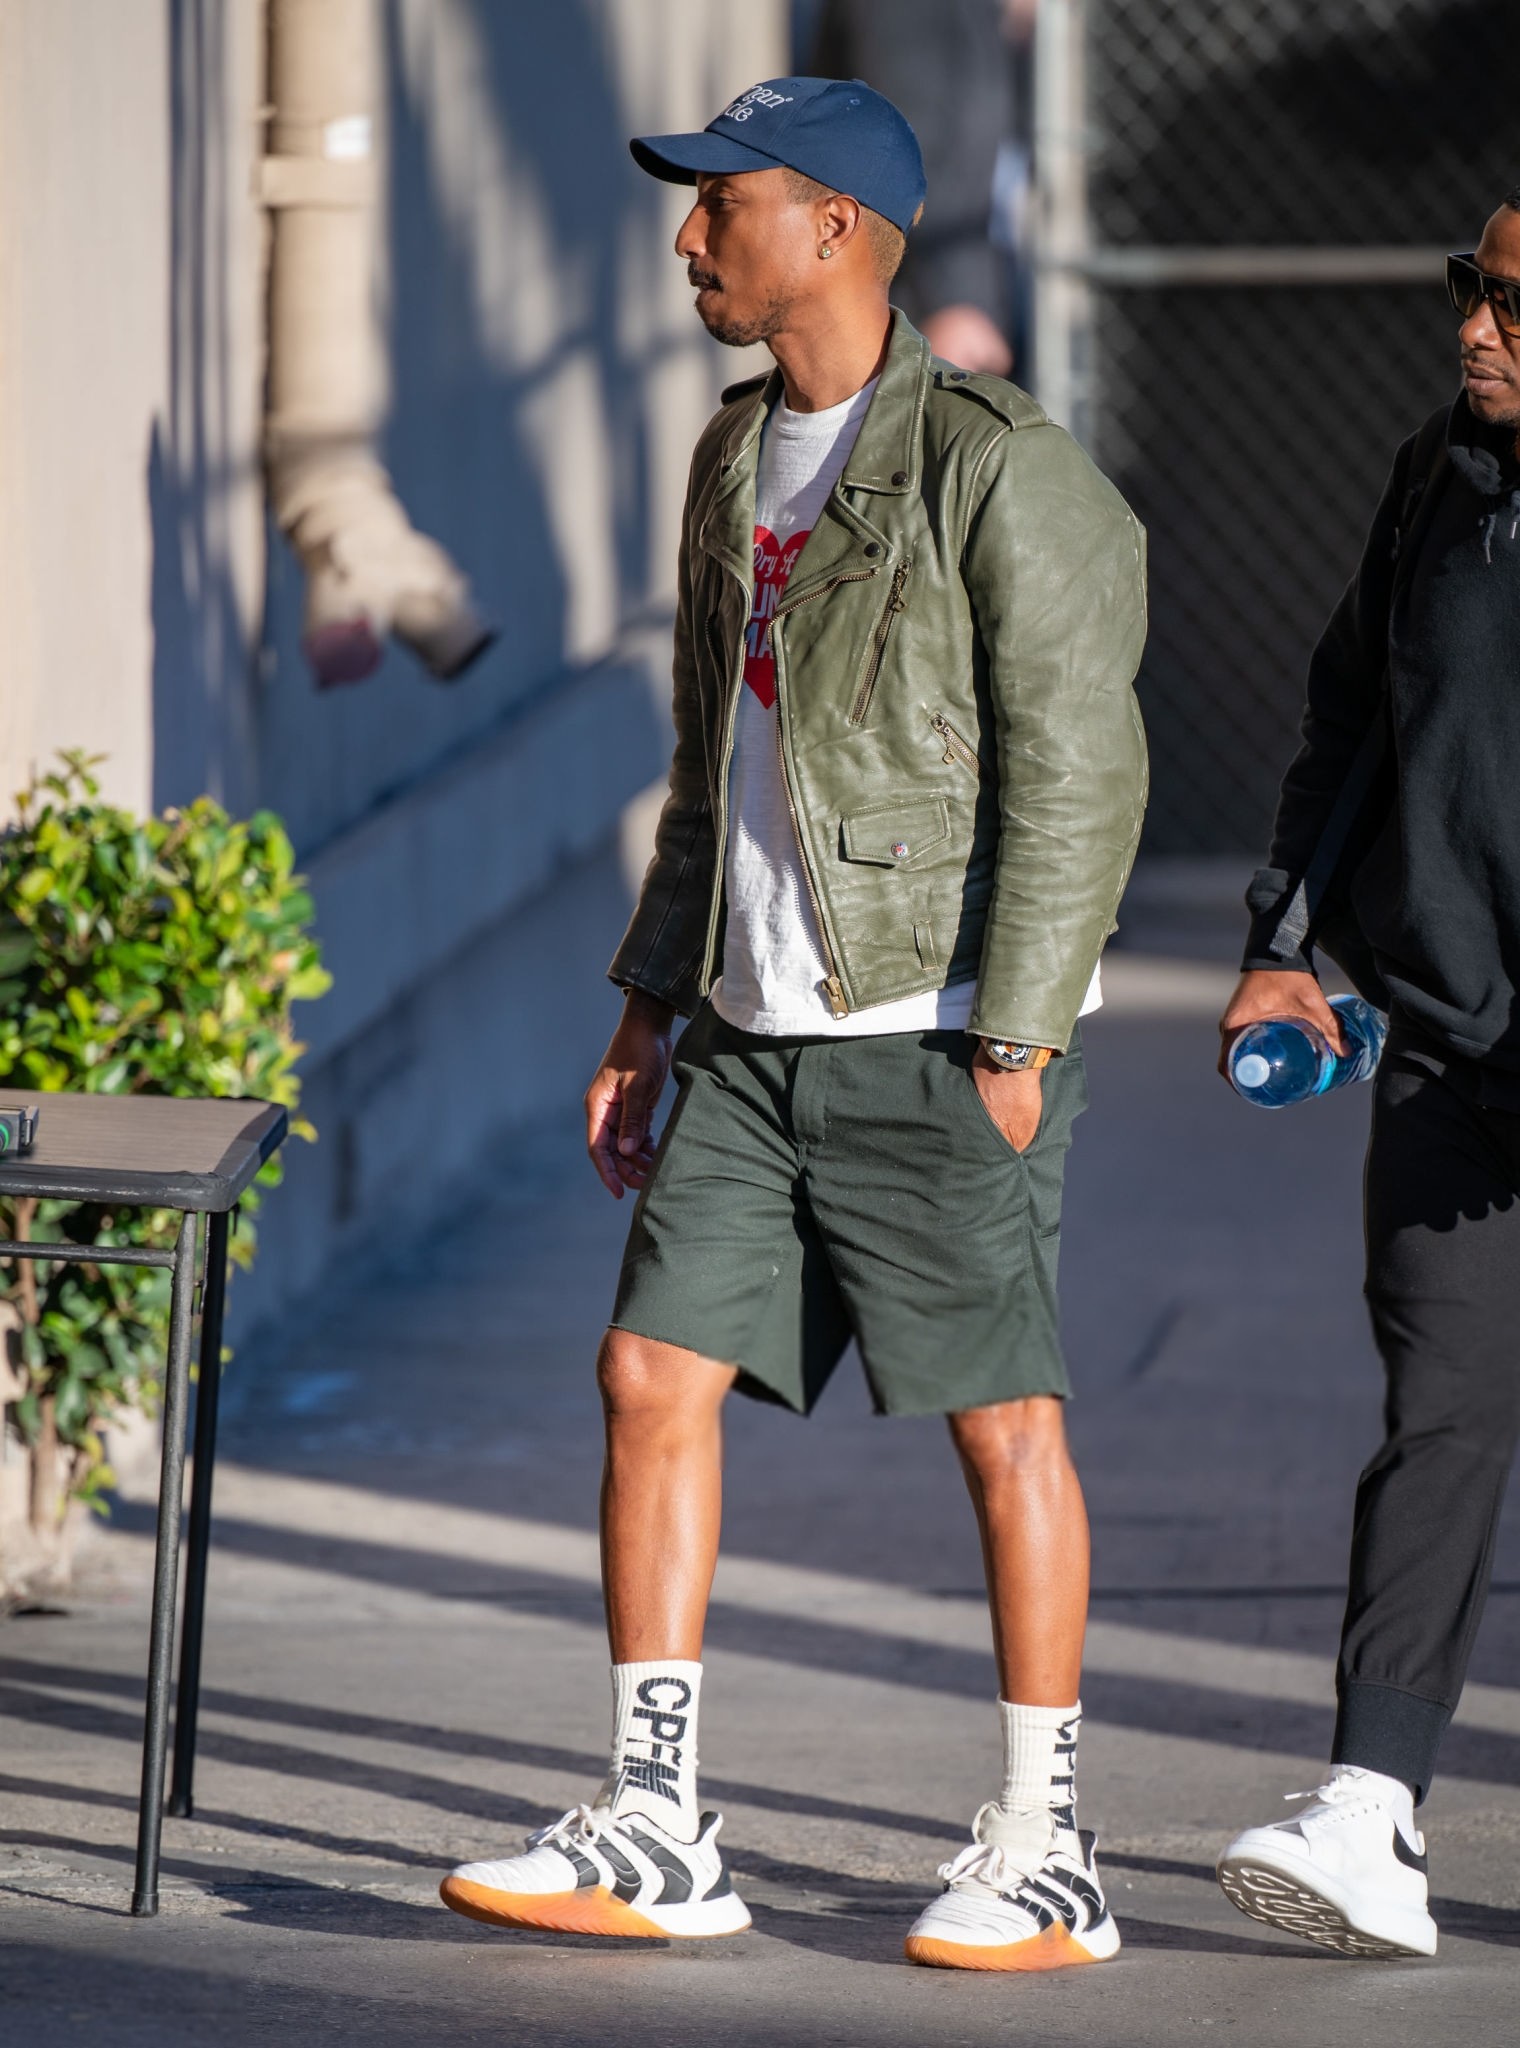 Pharrell Williams in the New Look of Florcore